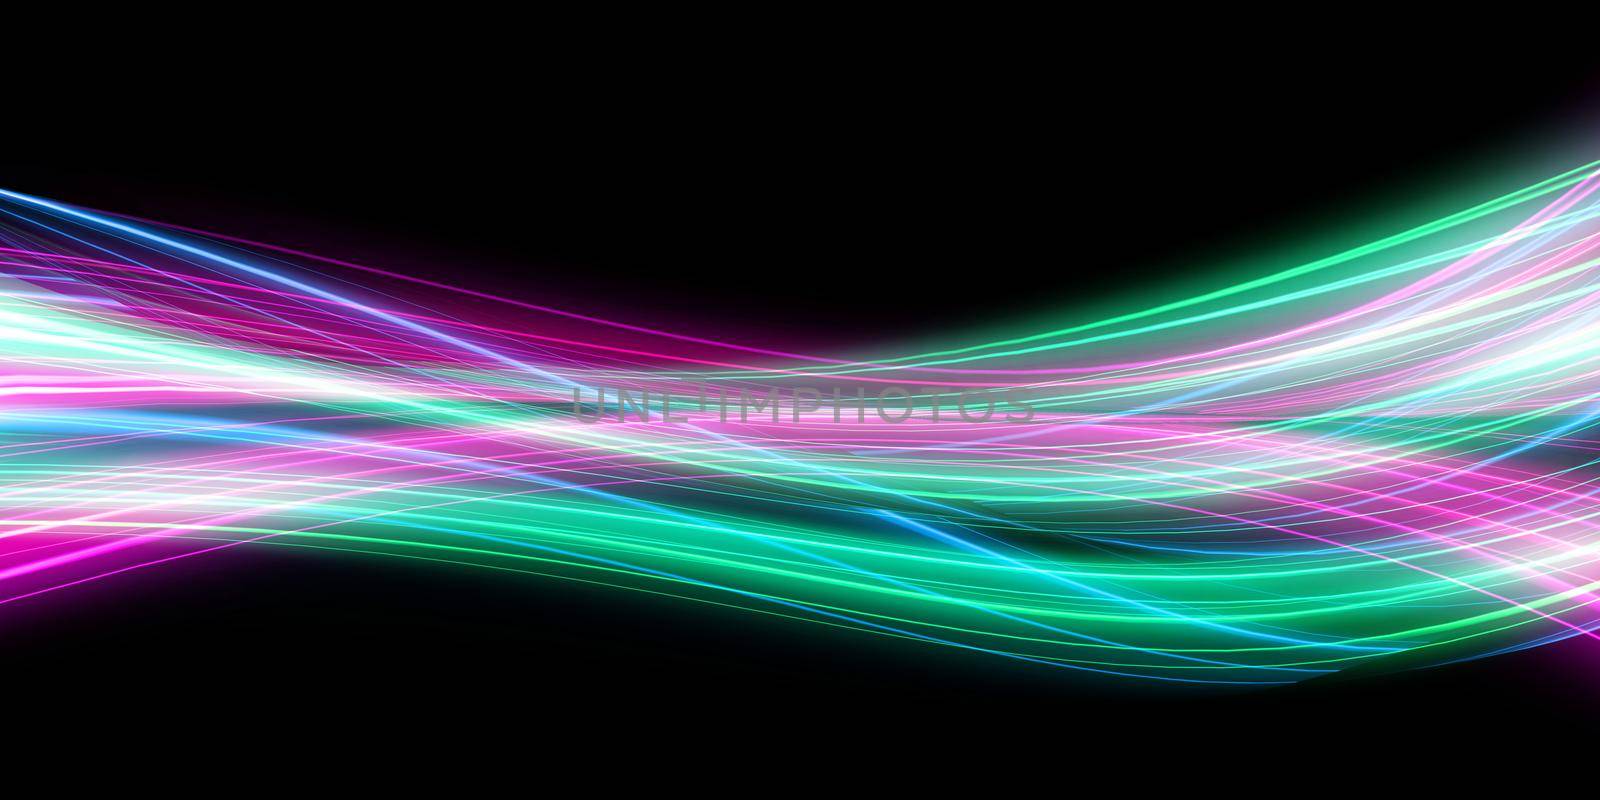 Futuristic Art Abstract with Digital Technology Theme